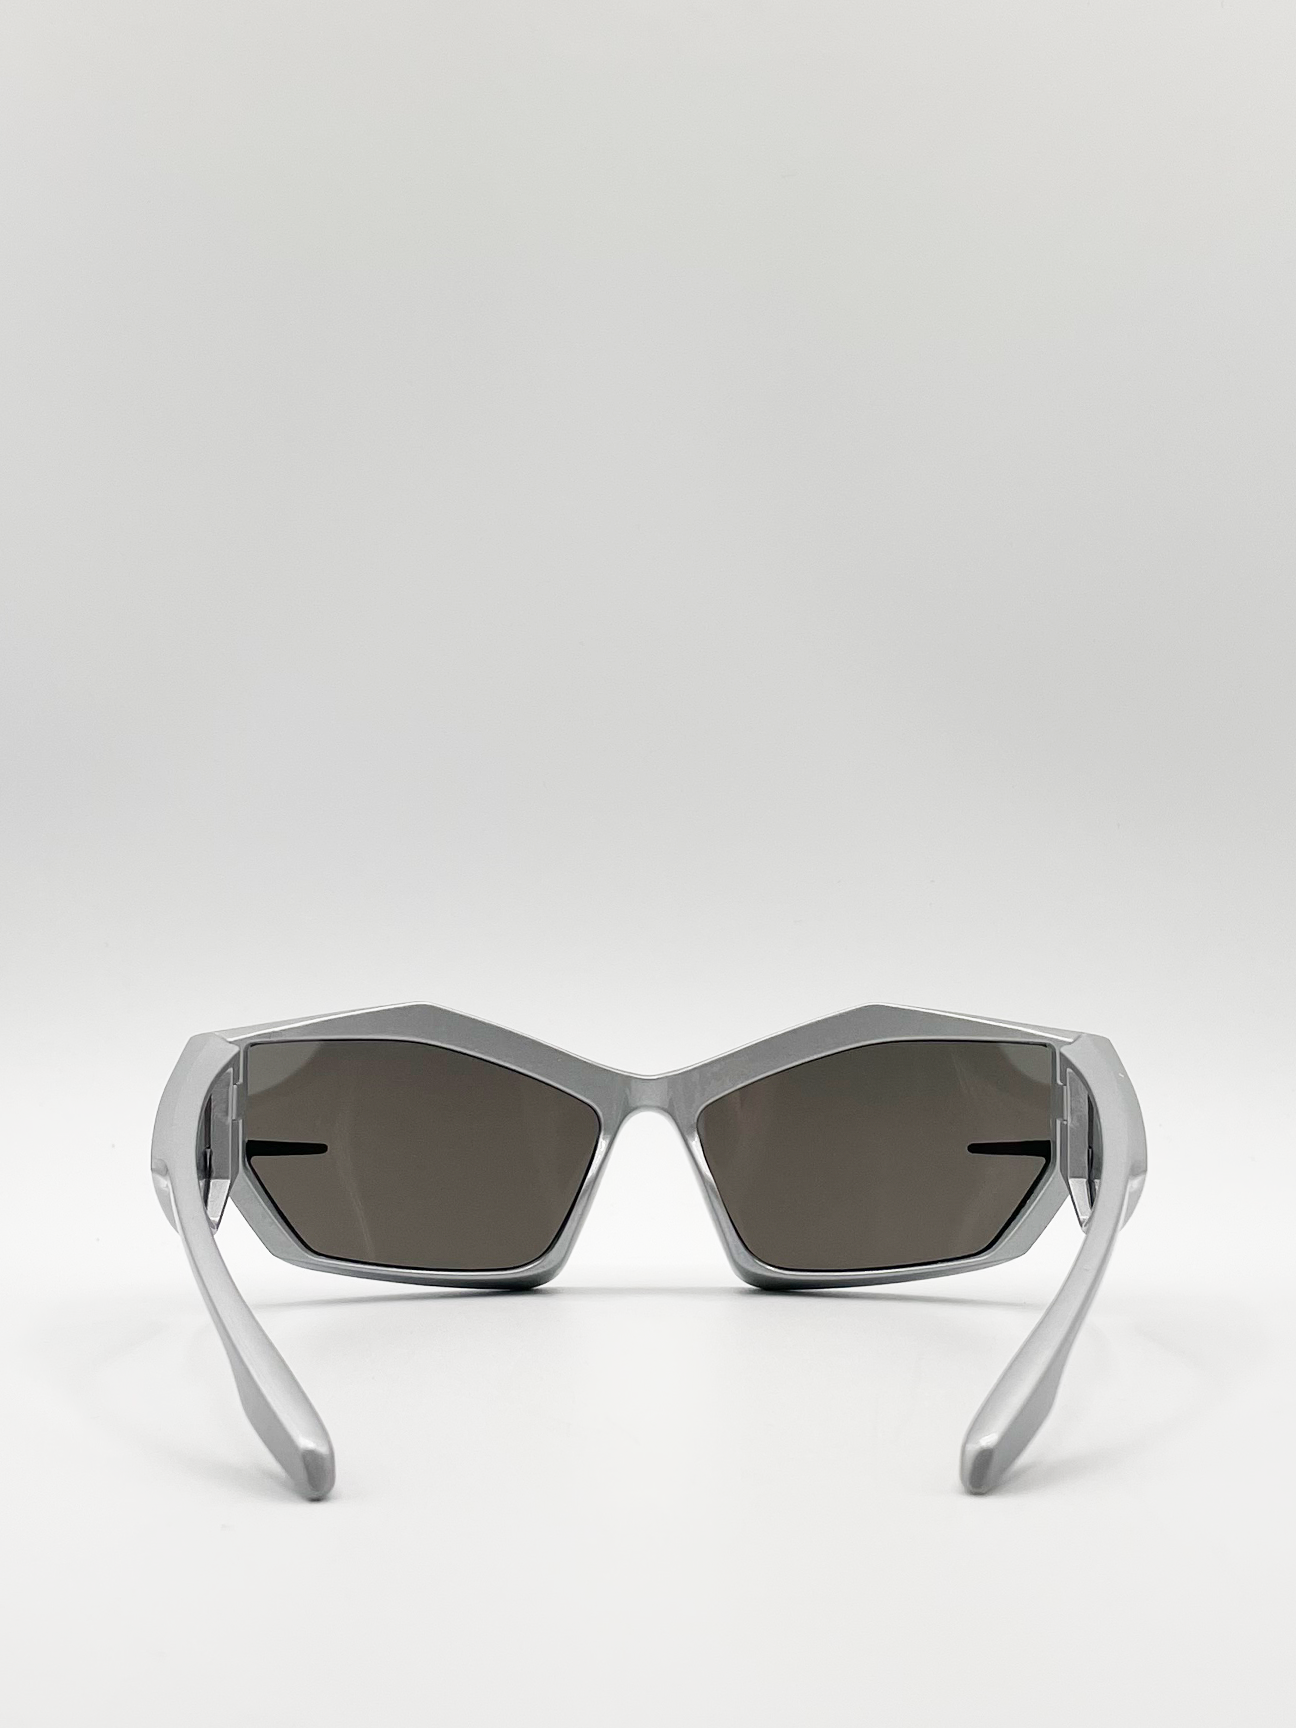 Racer style sunglasses in silver